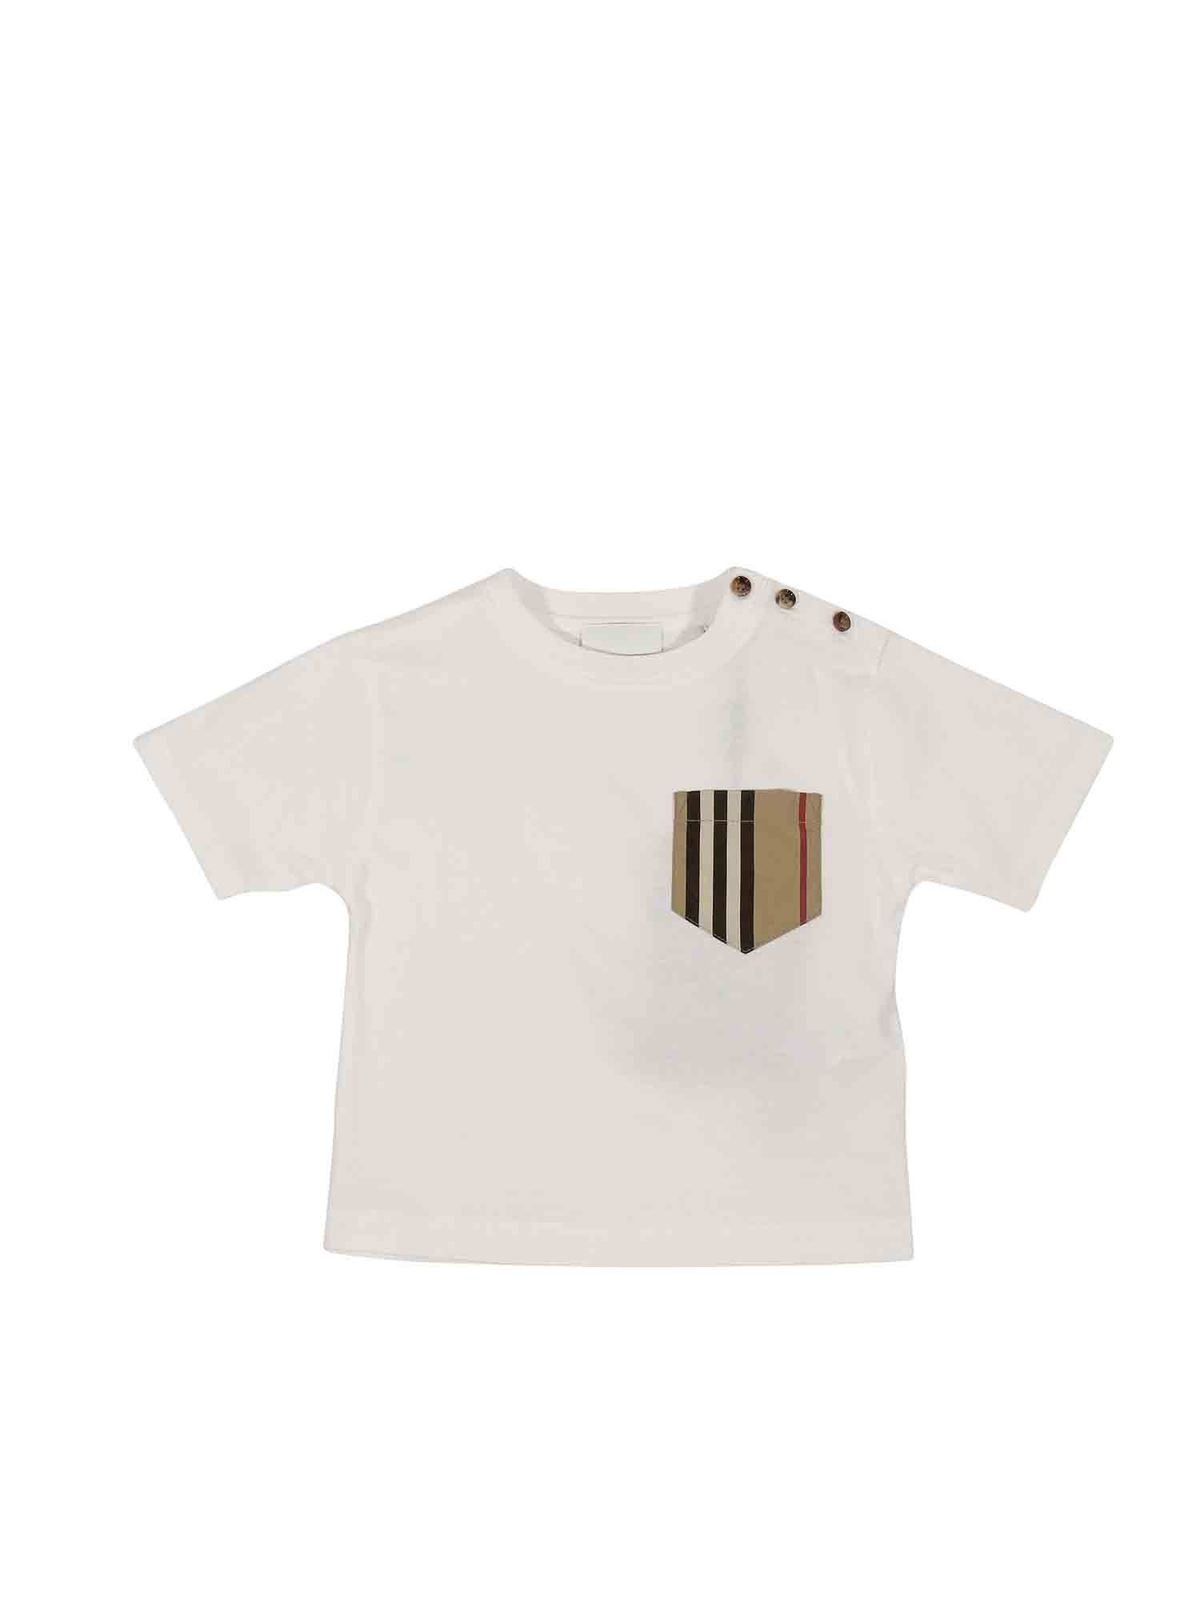 Burberry Kids' Striped Pocket T-shirt In White |